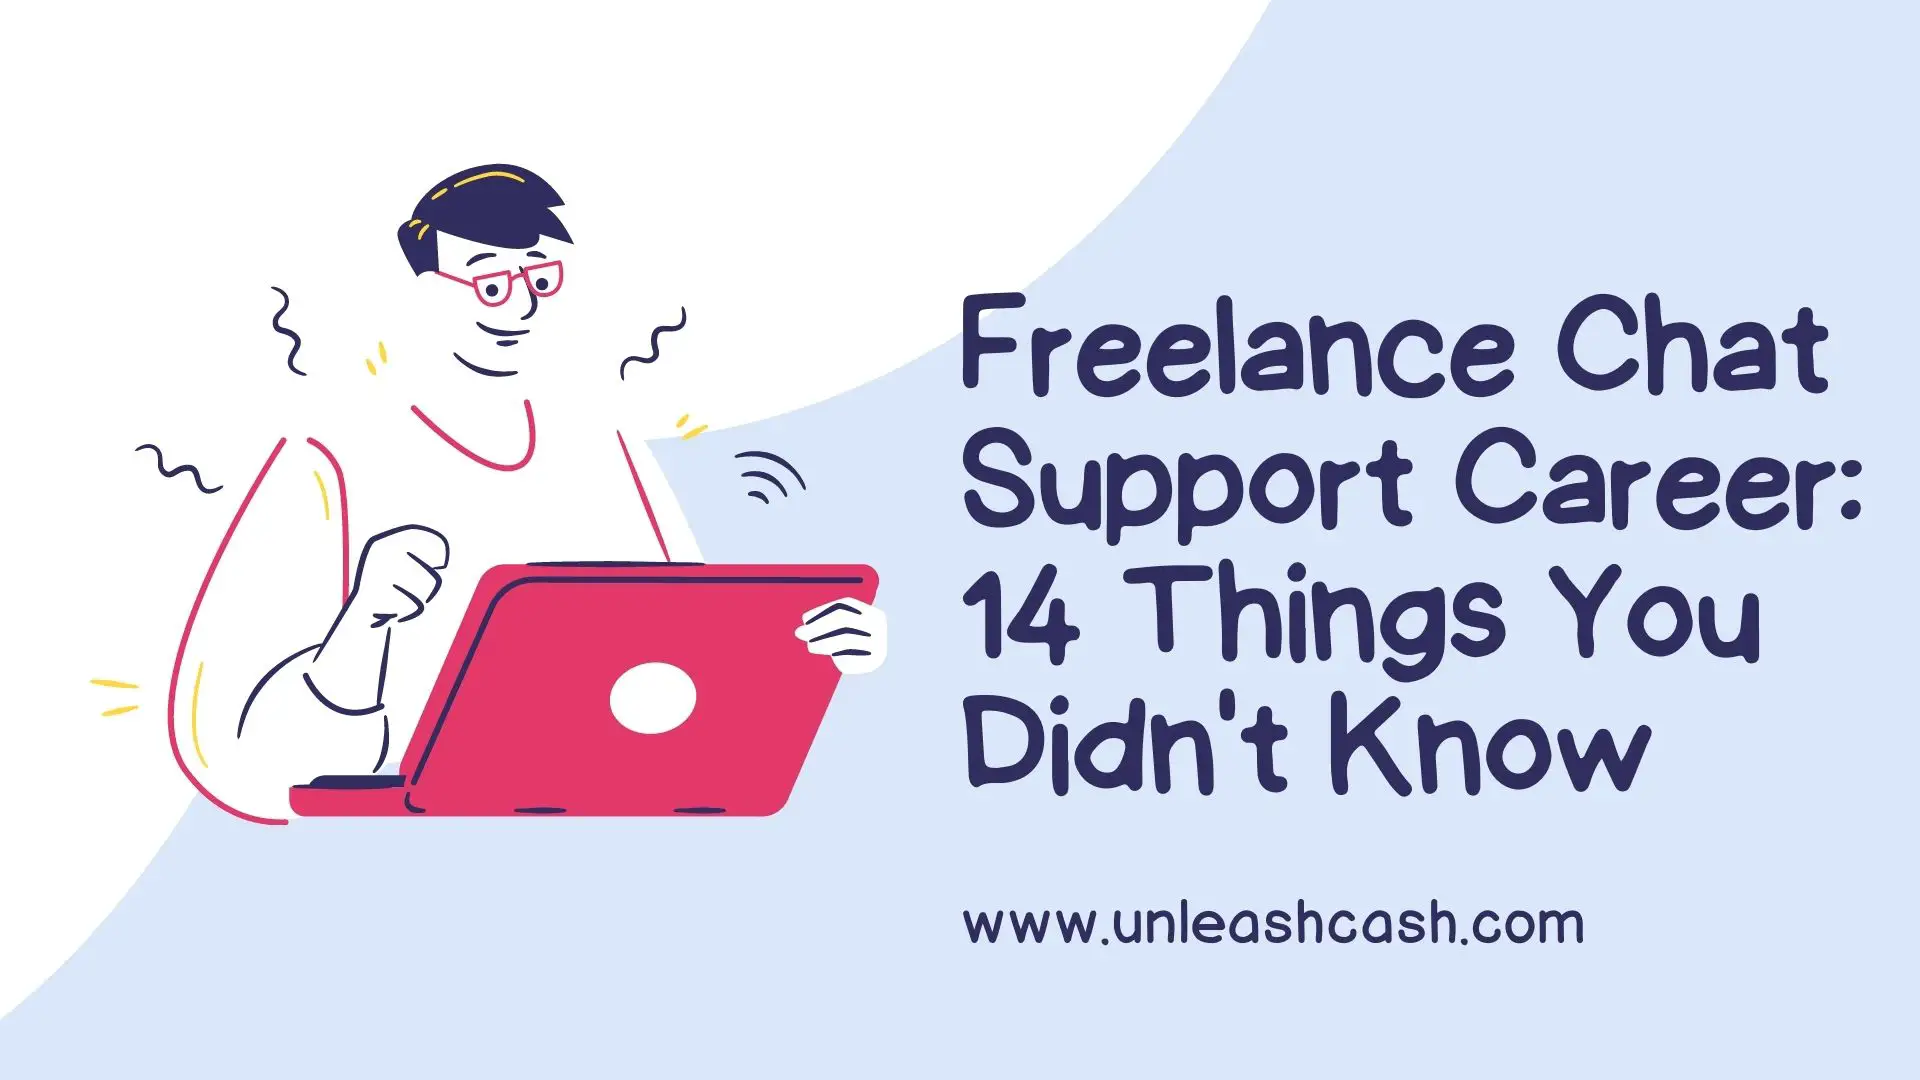 Freelance Chat Support Career: 14 Things You Didn't Know